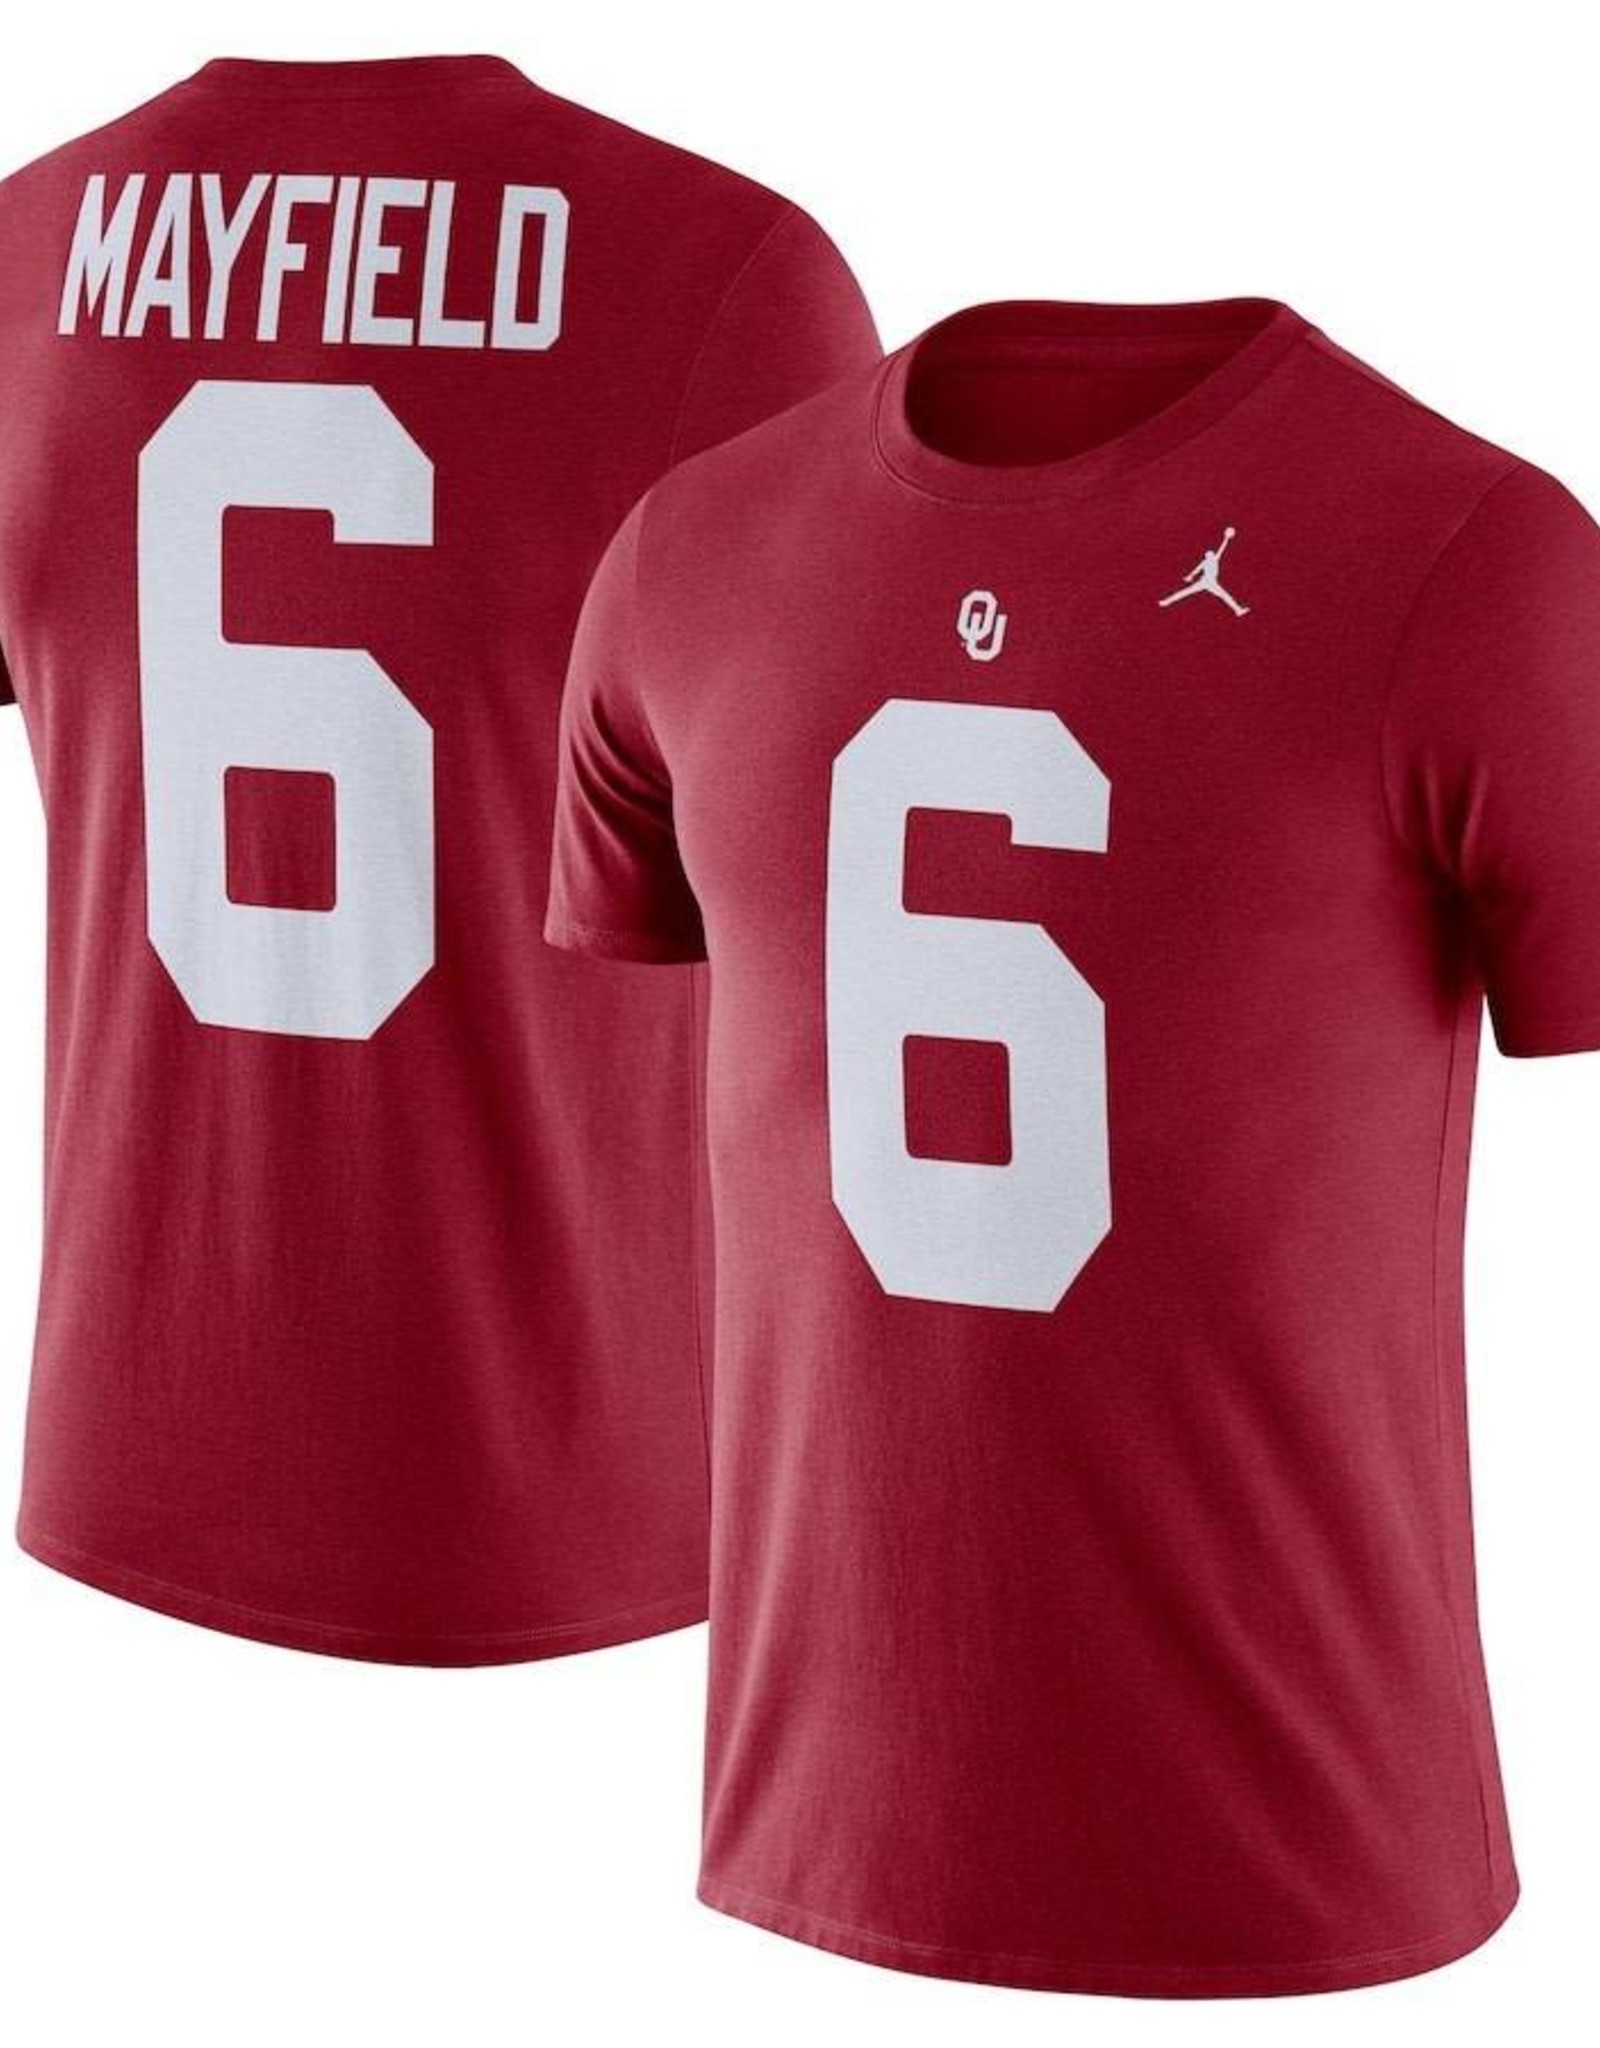 mayfield jersey youth